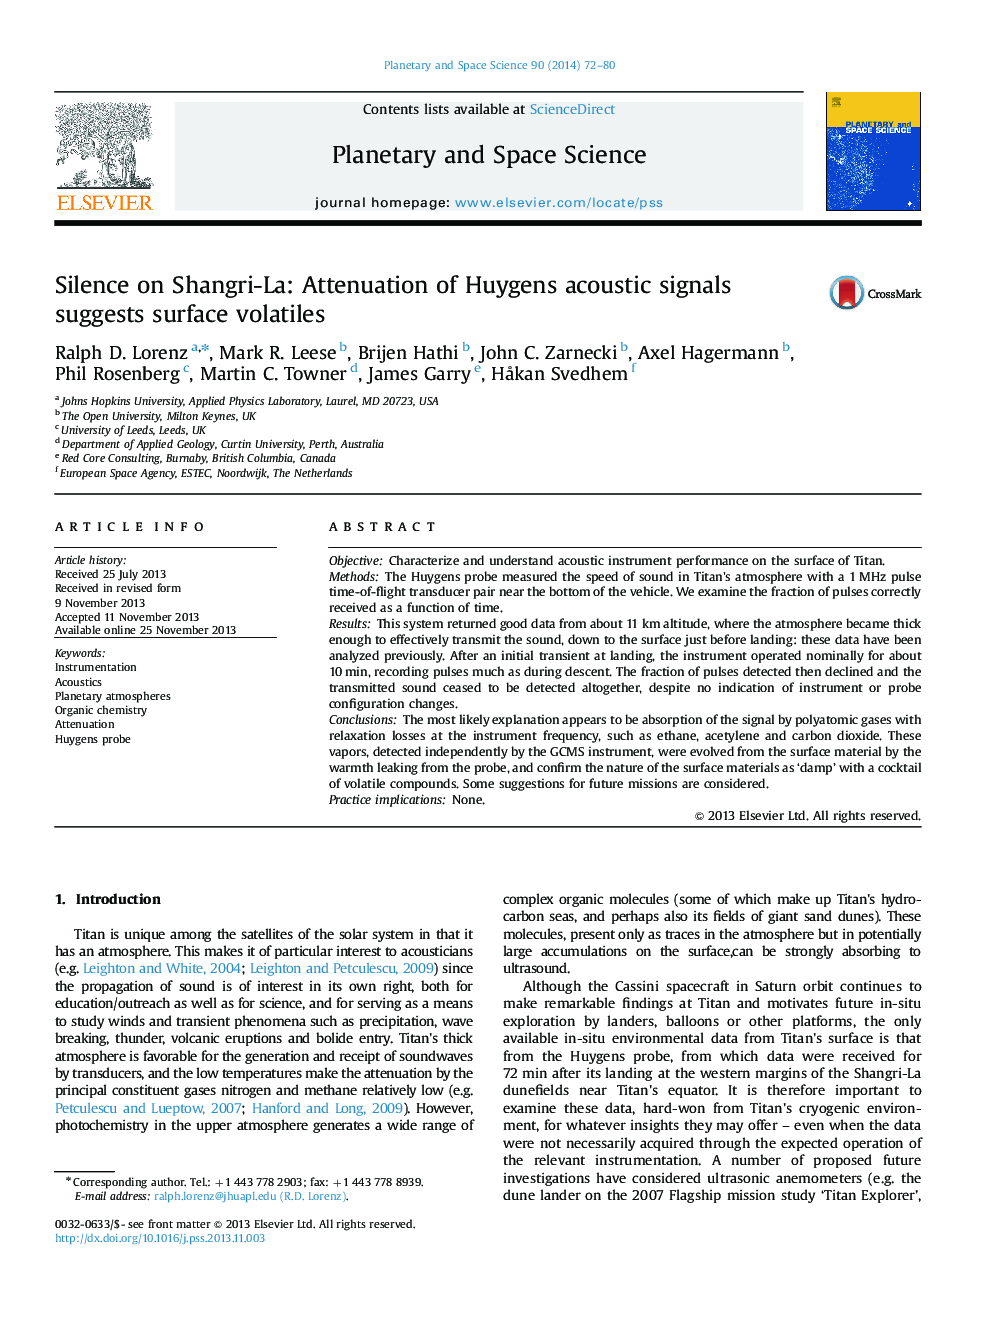 Silence on Shangri-La: Attenuation of Huygens acoustic signals suggests surface volatiles